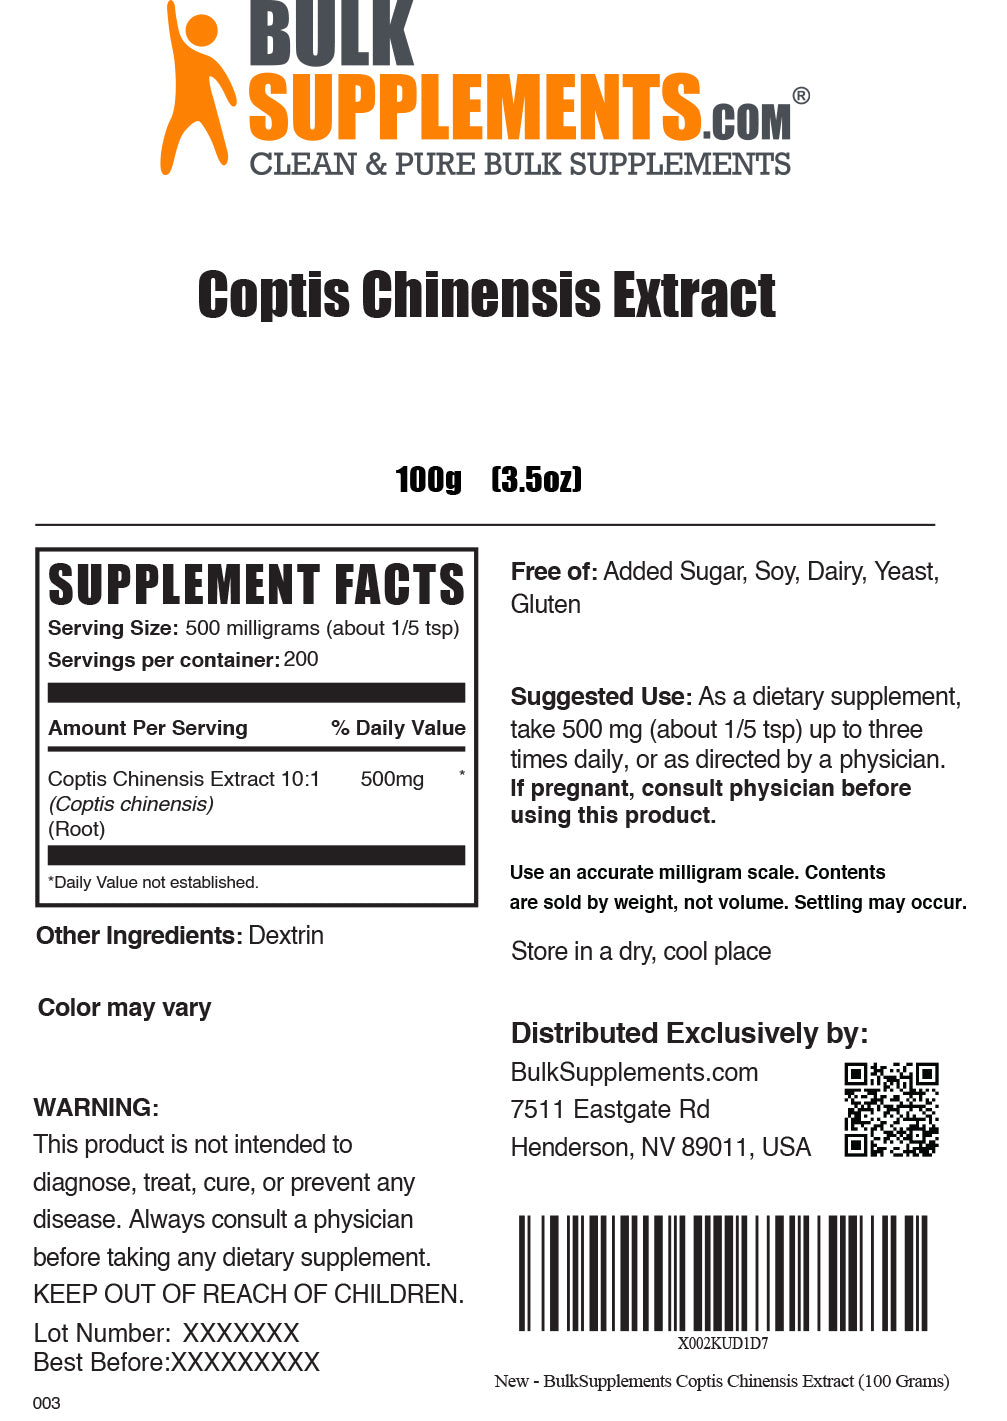 100g Coptis Chinensis Extract Supplement Facts